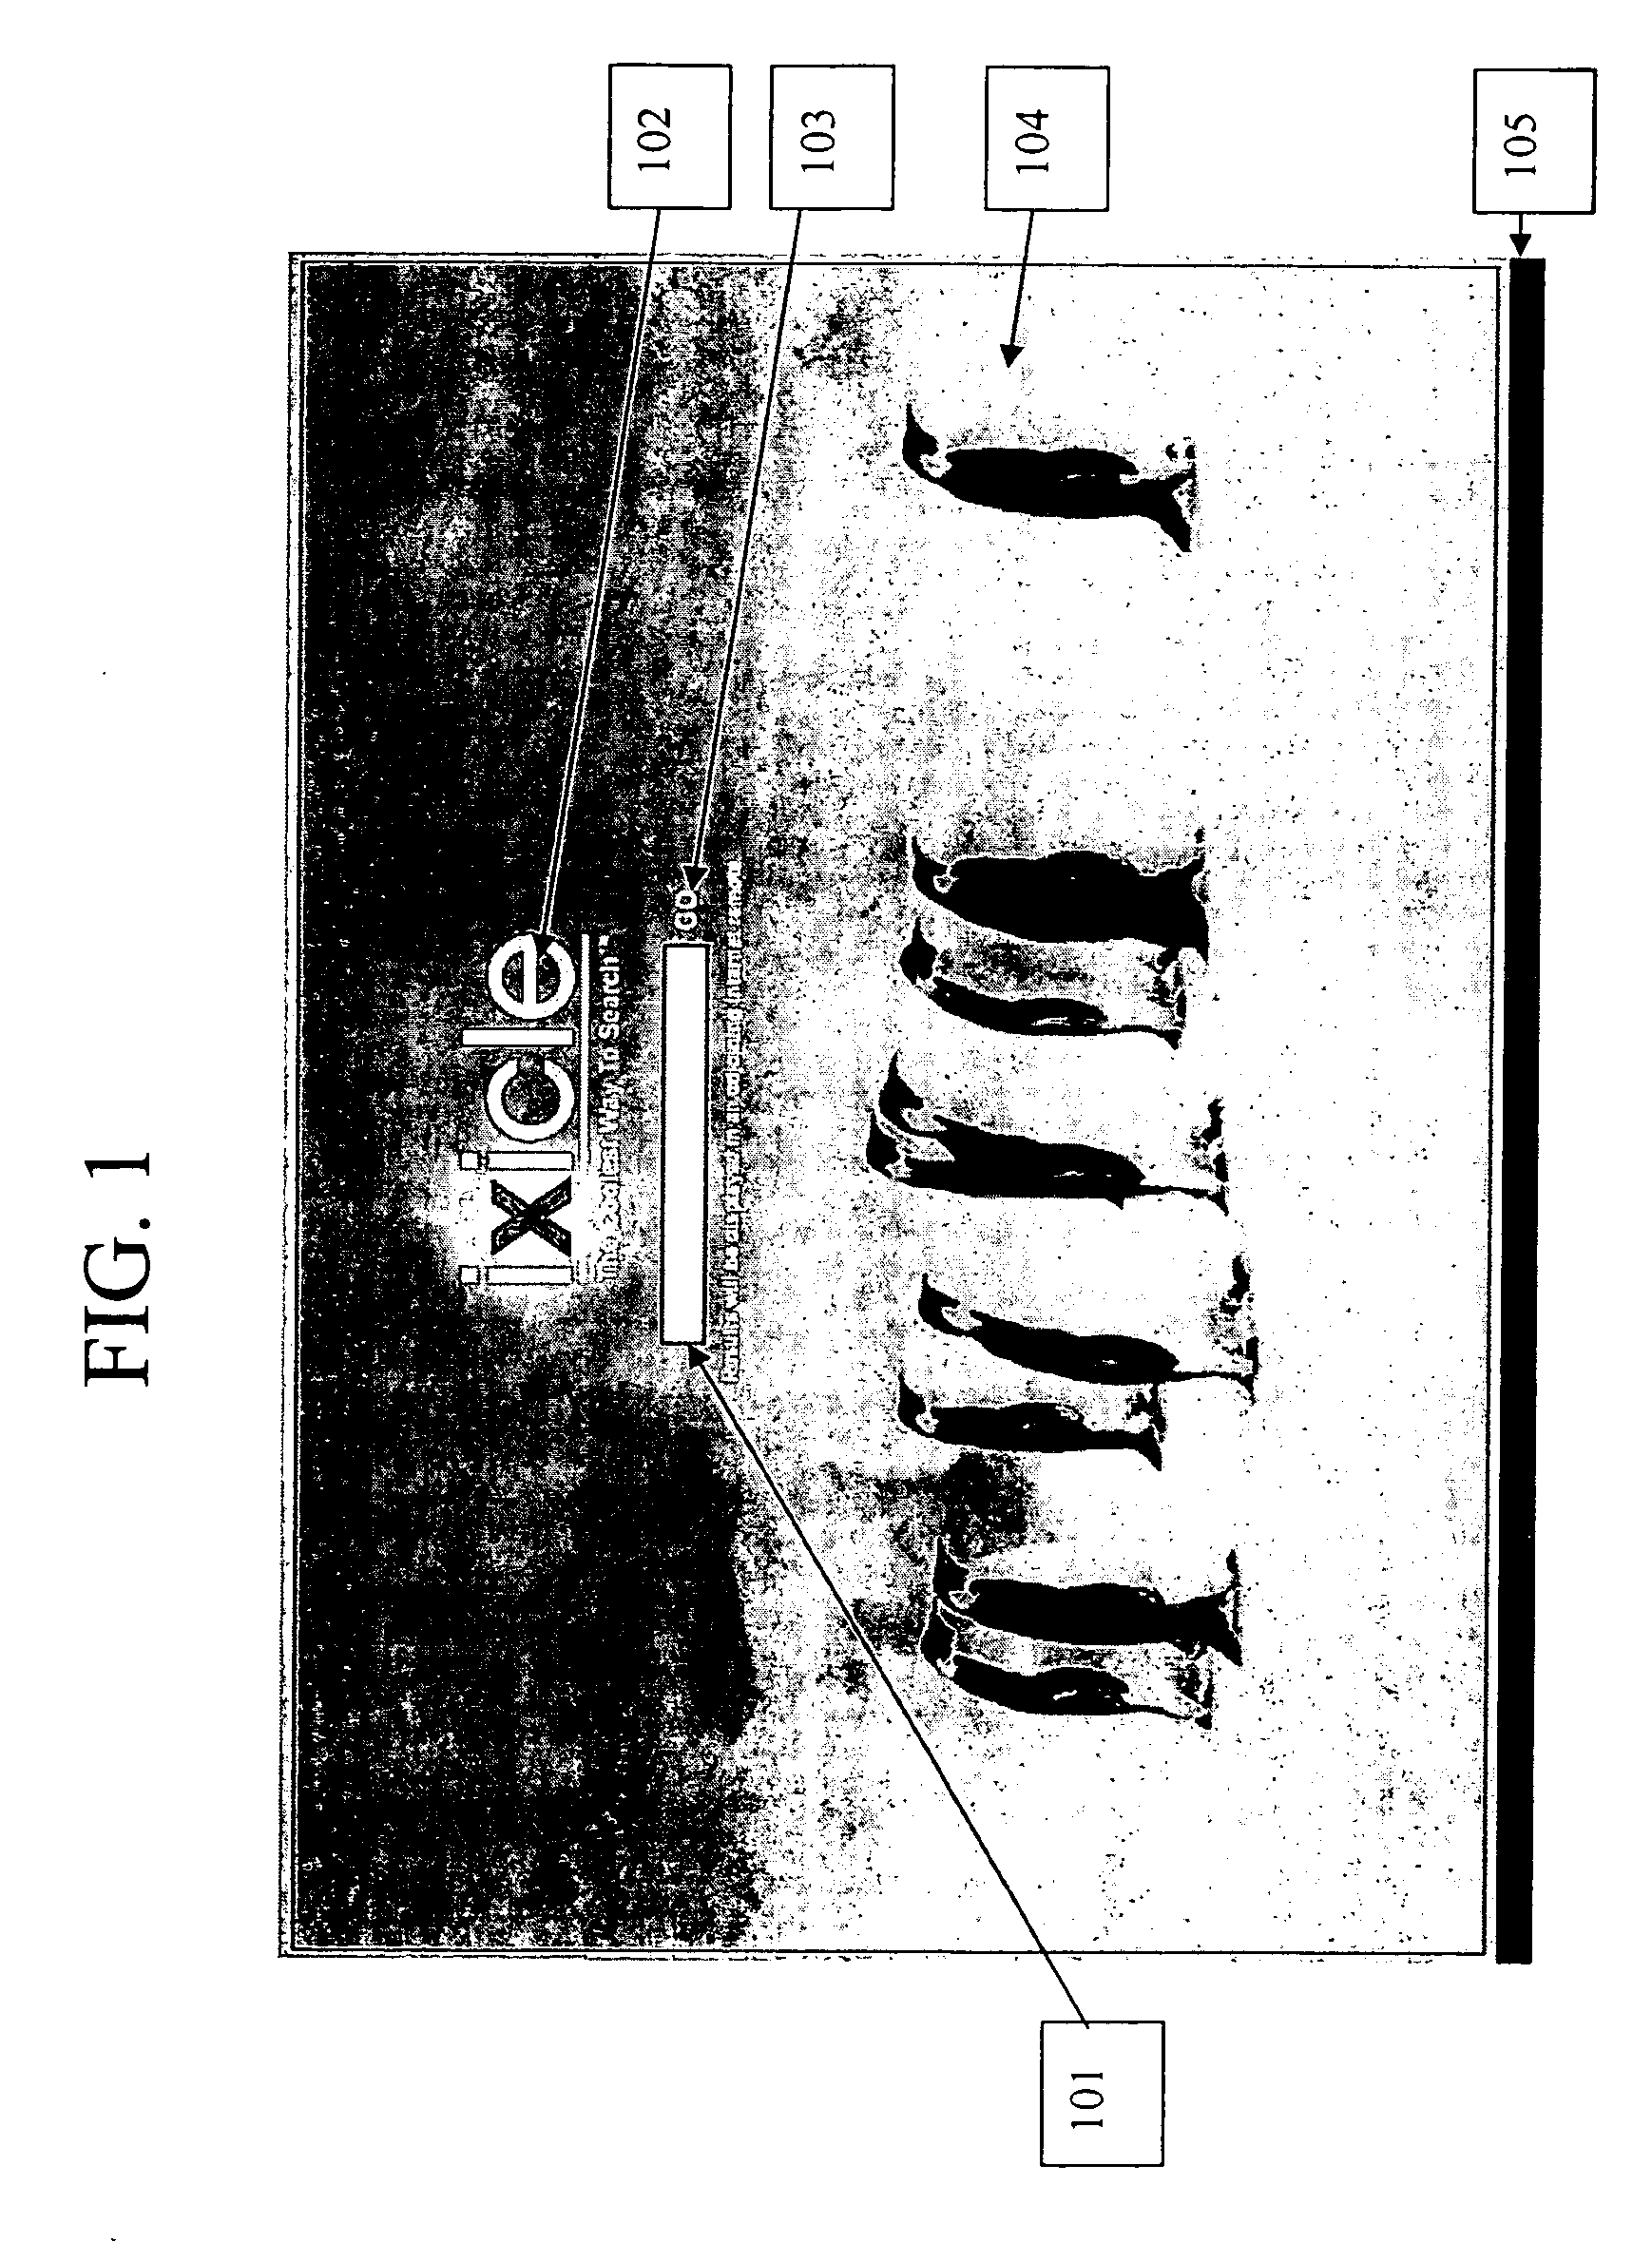 Internet-based search system and method of use